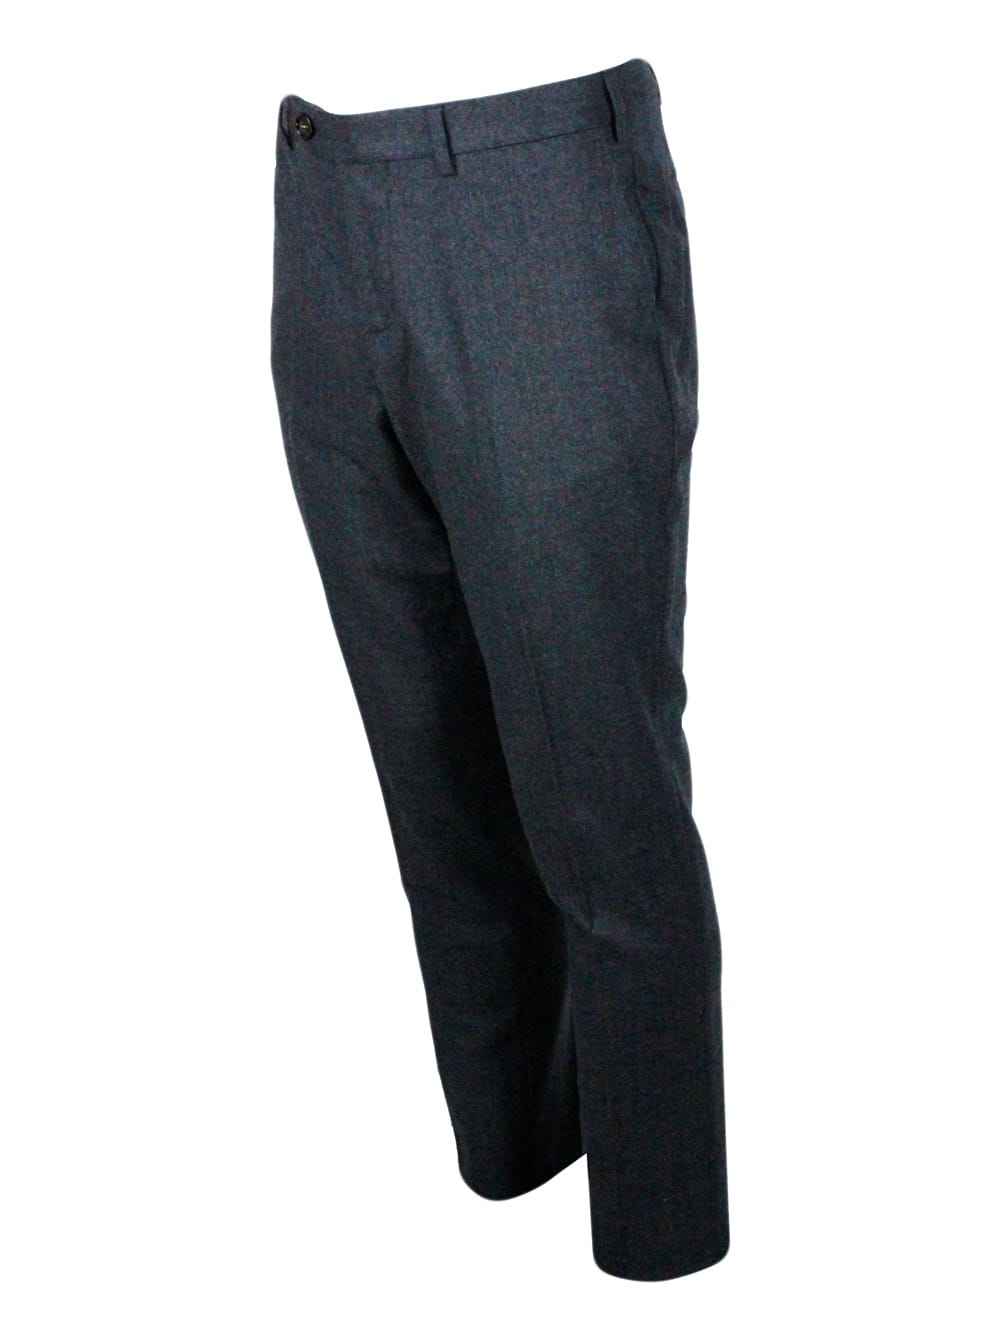 Shop Brunello Cucinelli Trousers Made Of Soft And Precious 100% Virgin Wool With Front And Back Pockets, Zip Closure. Italia In Grey